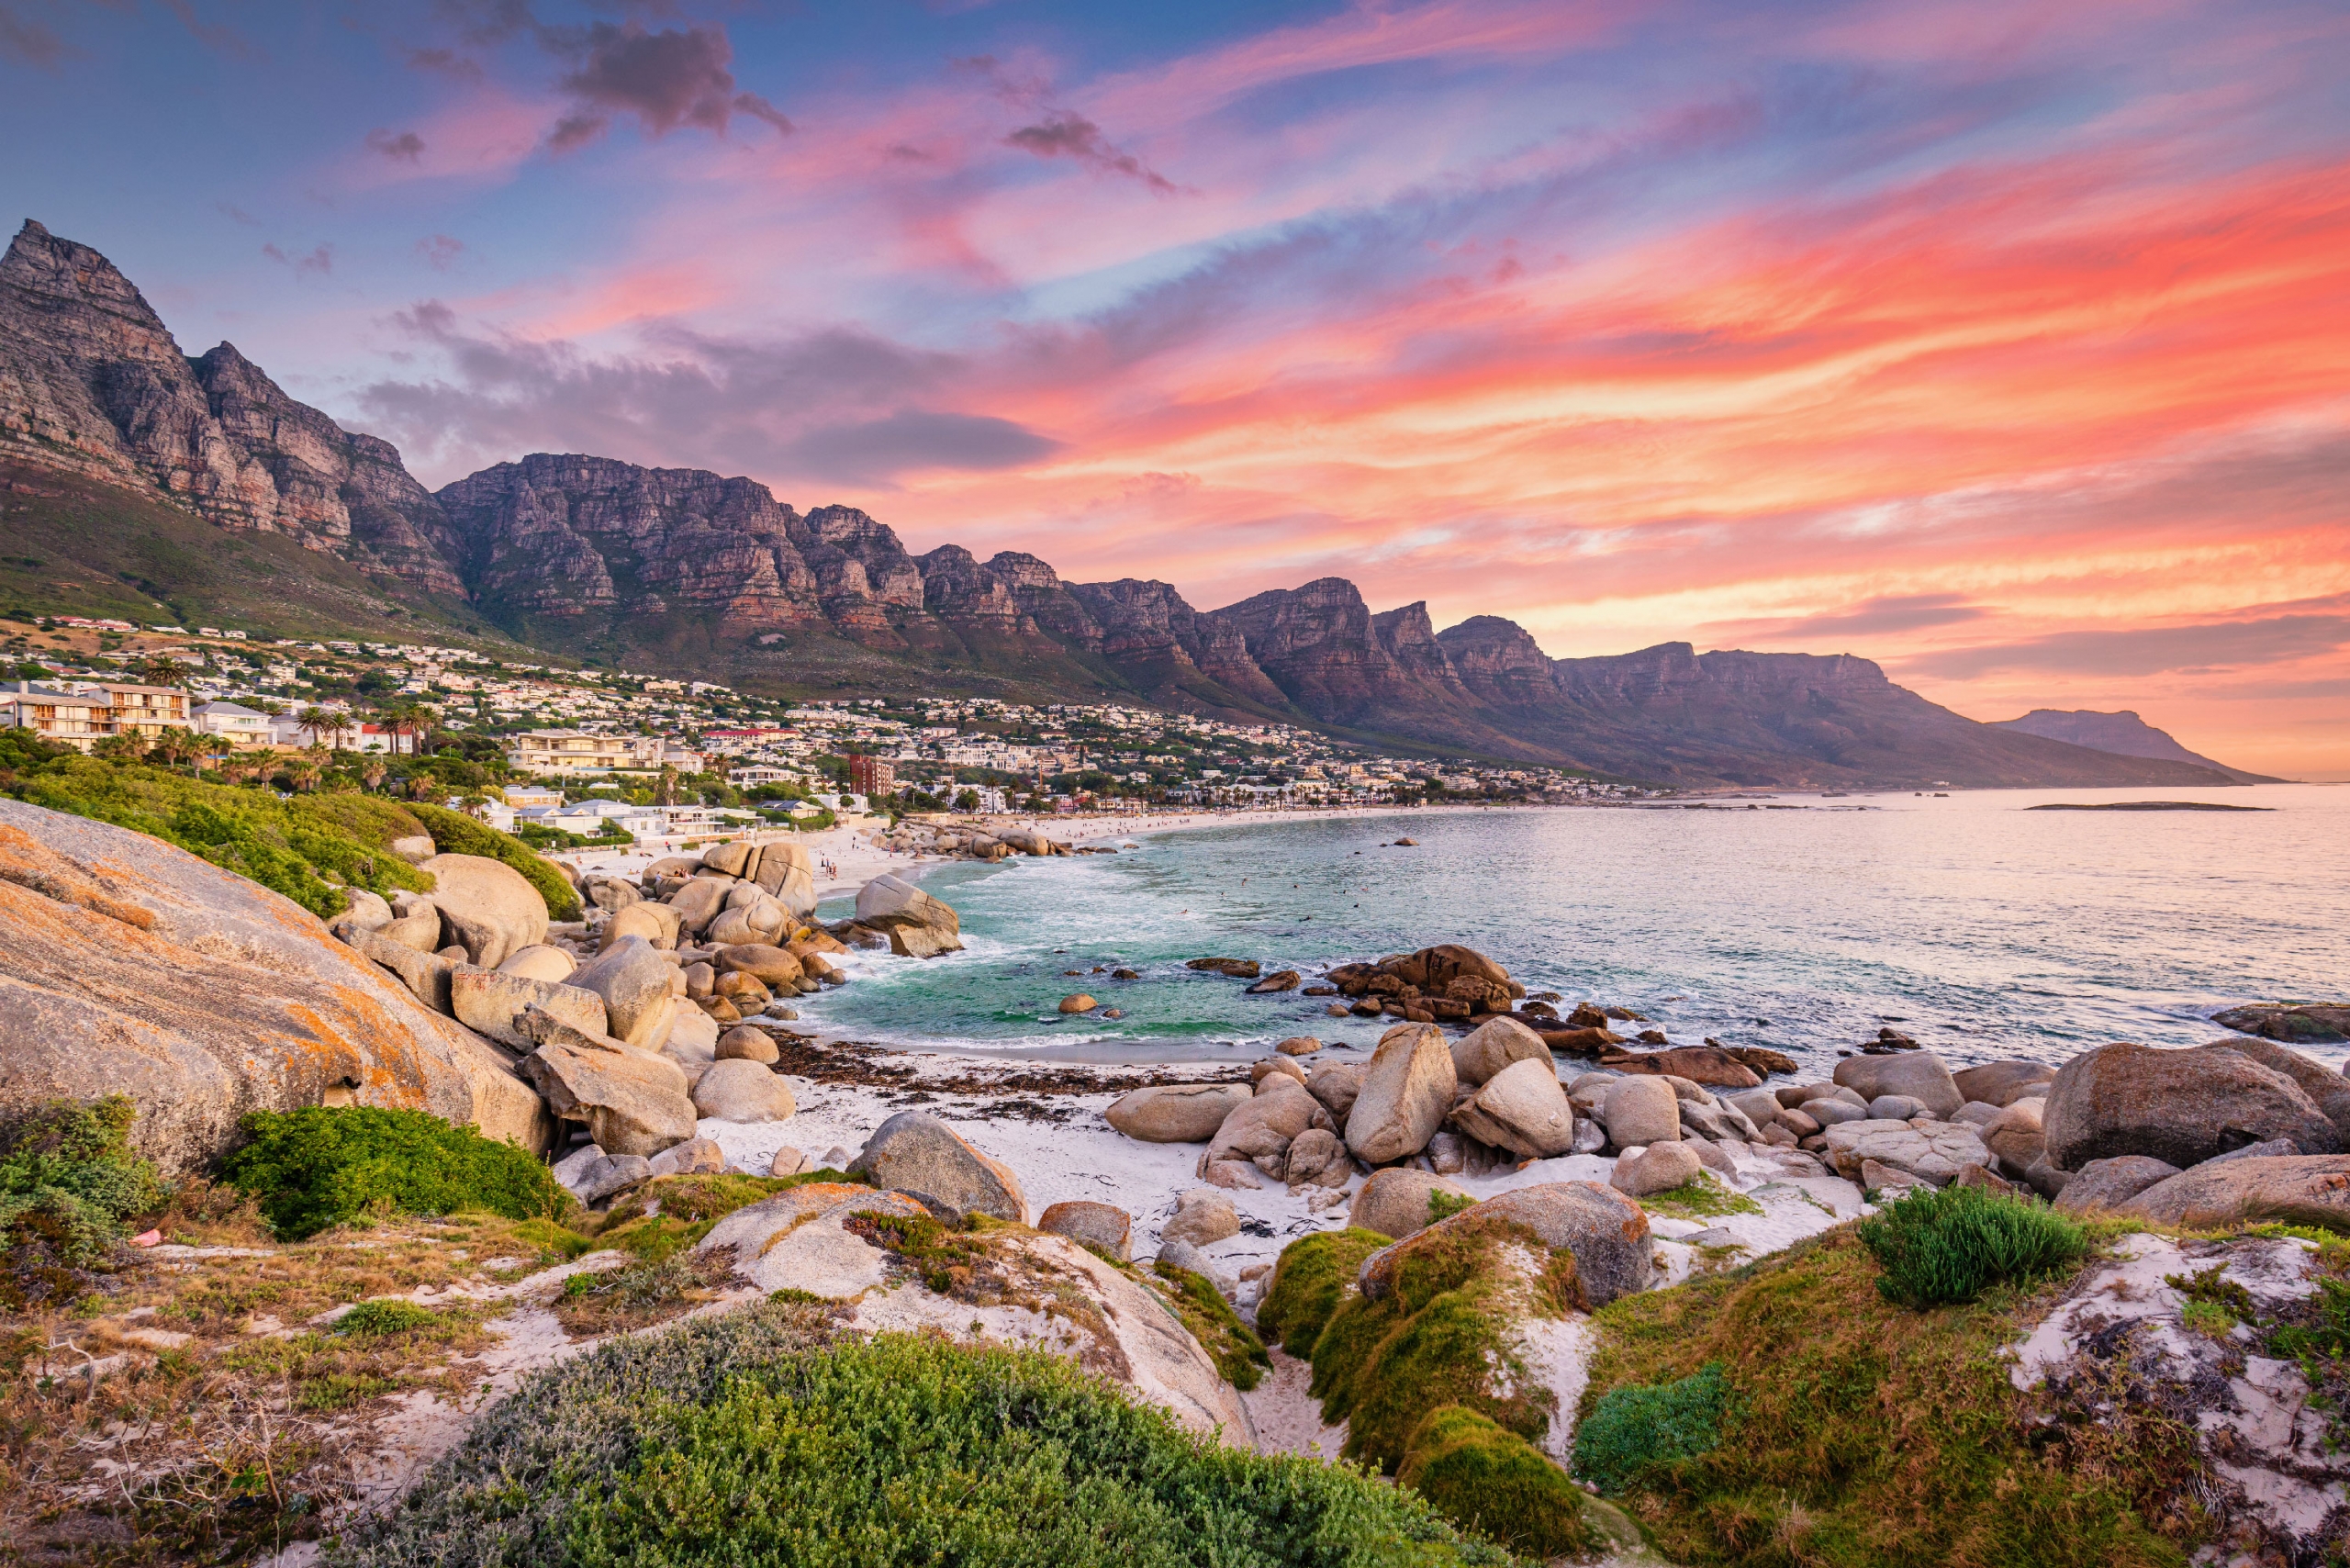 South Africa: Cape Town & the Garden Route
